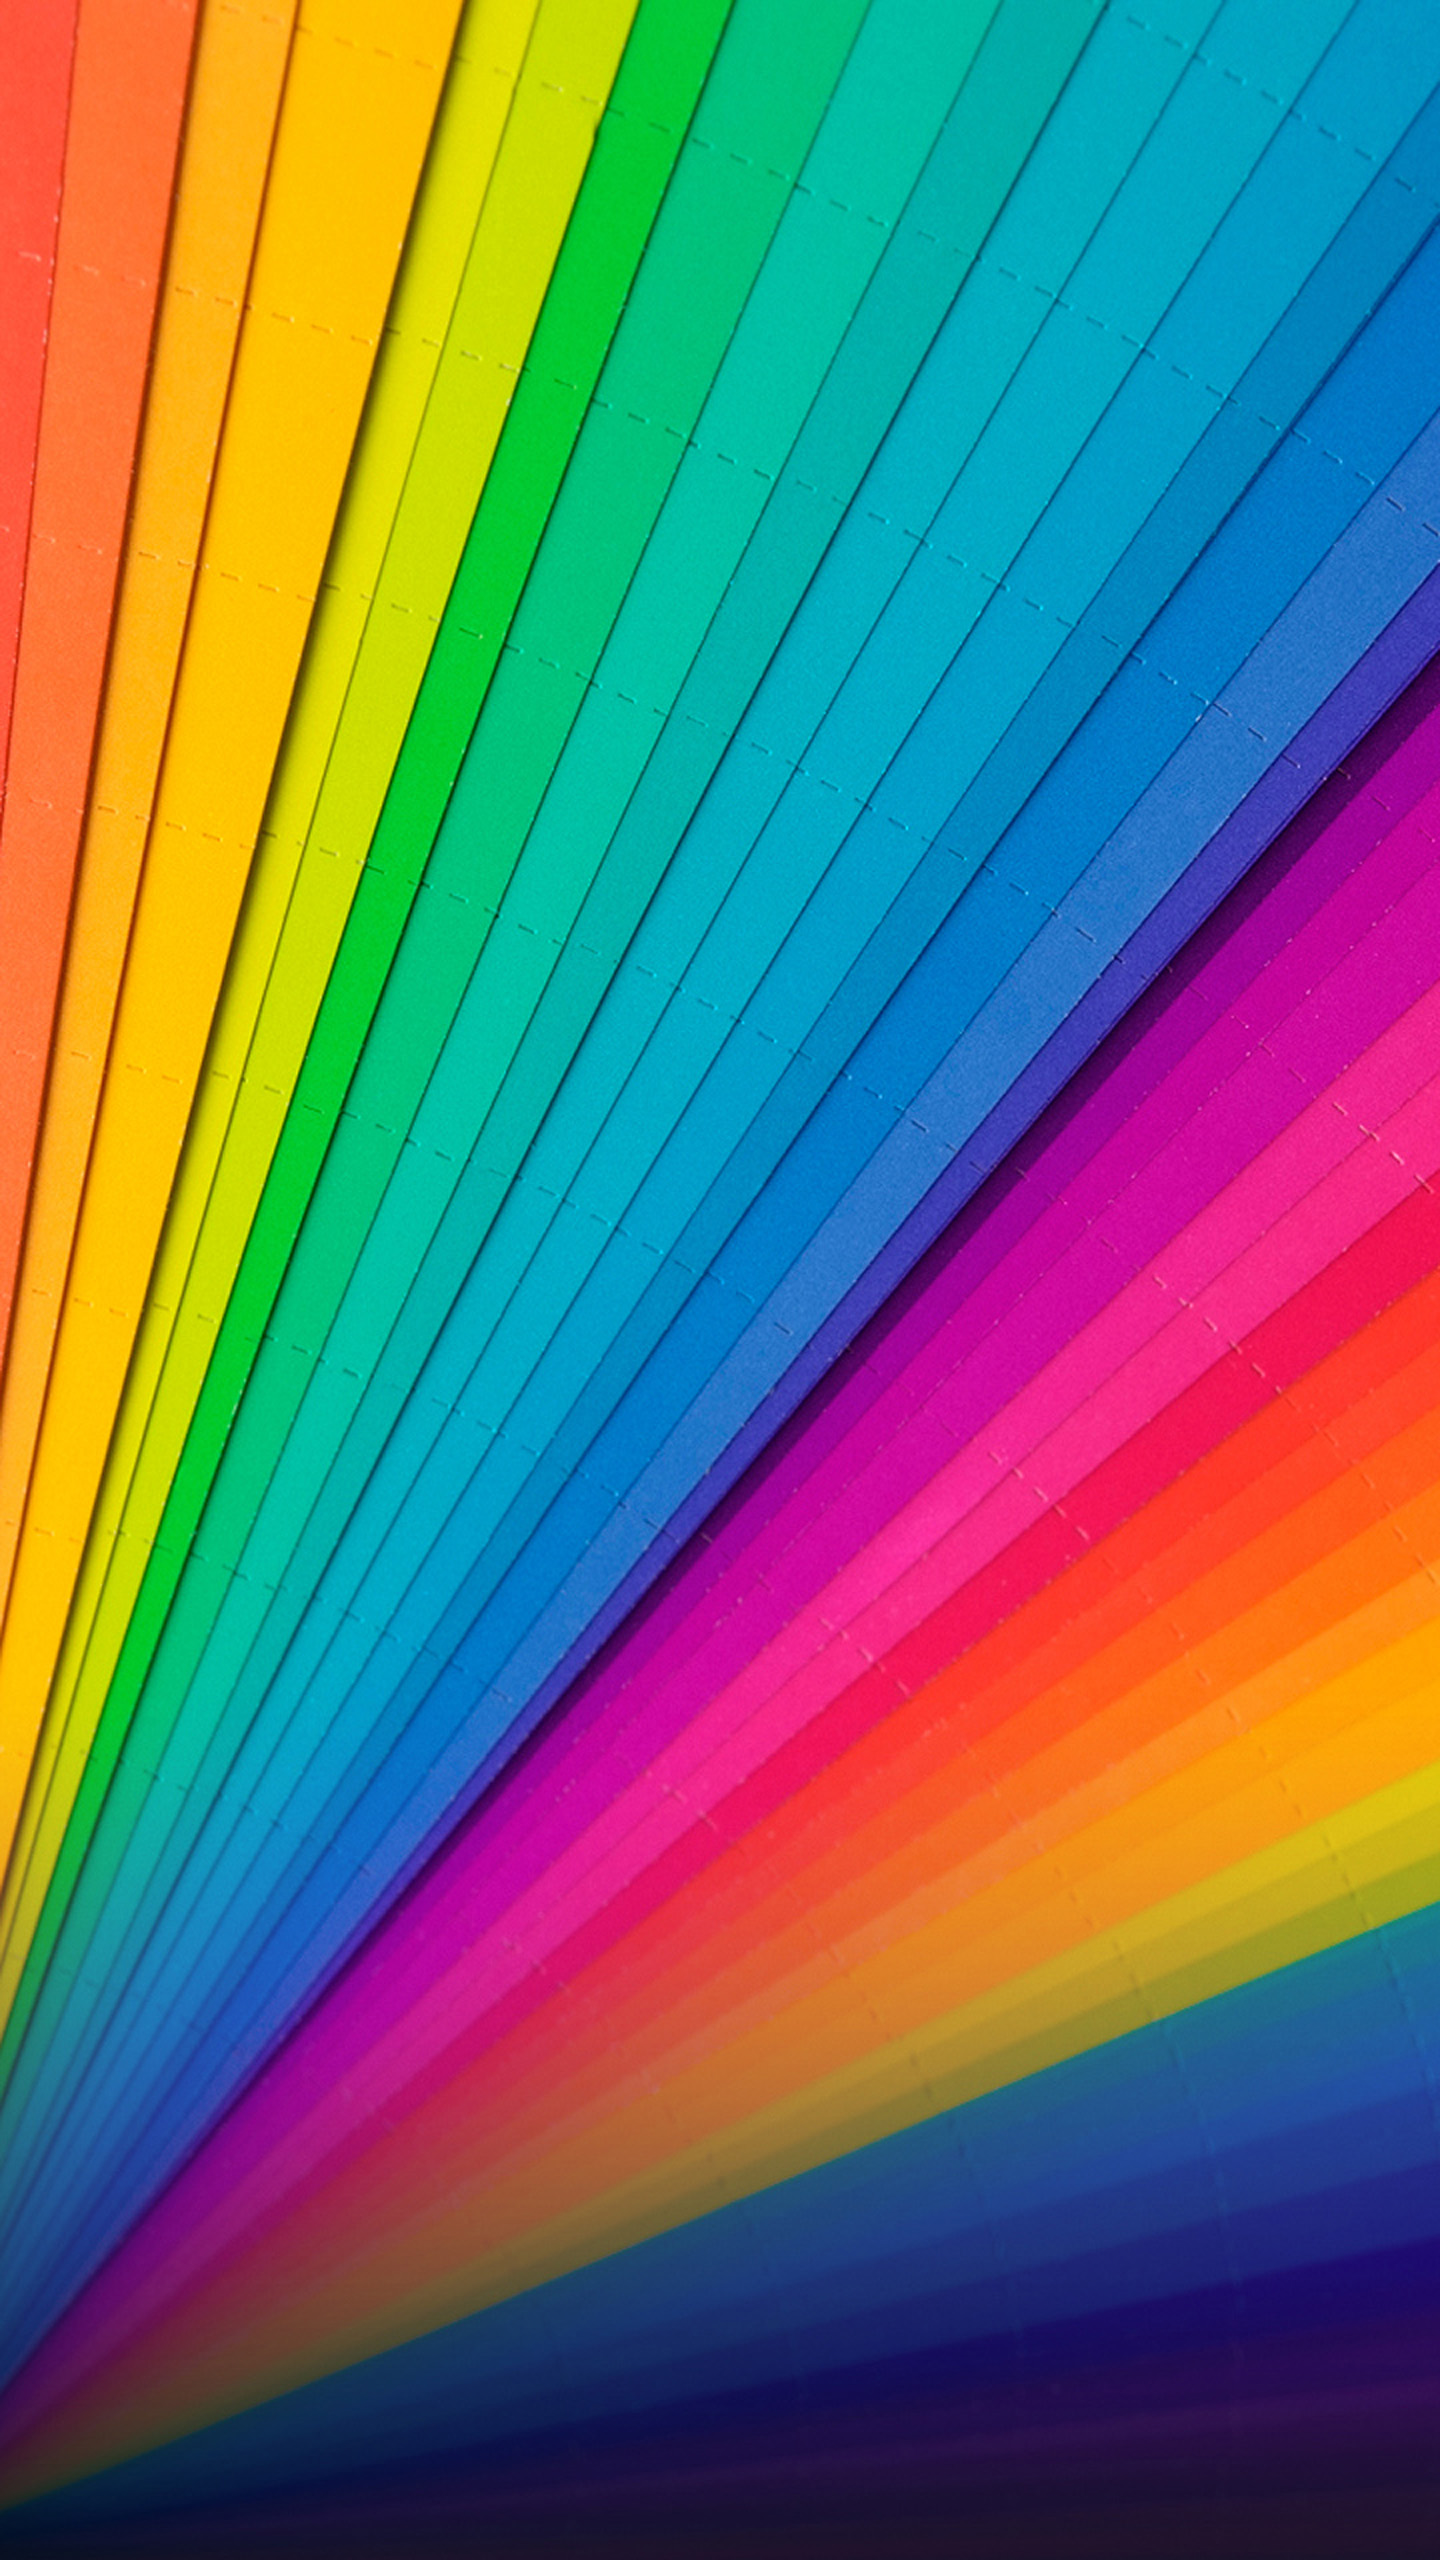 Great color theme wallpapers for galaxy S6.jpg